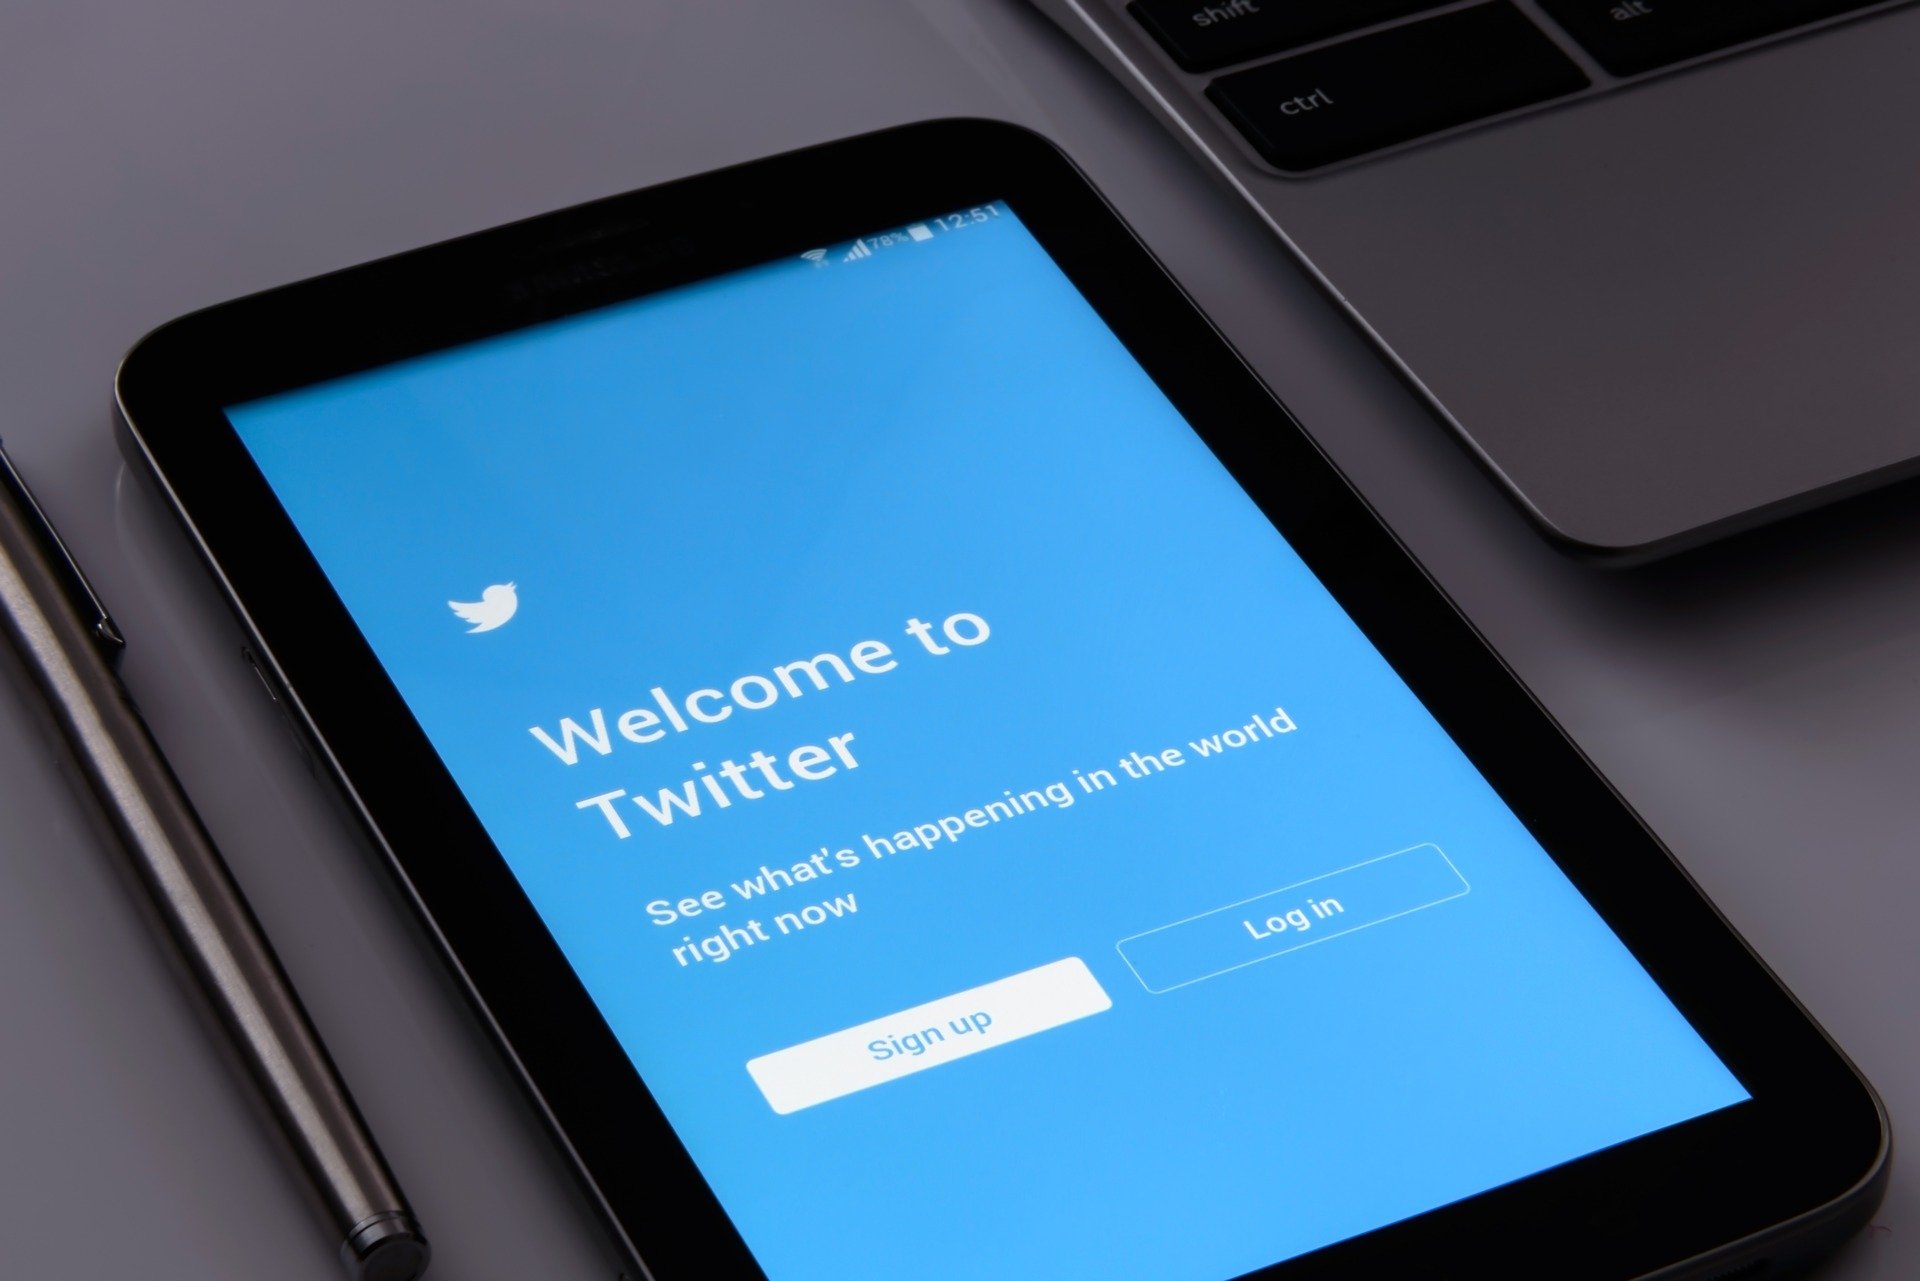 Introducing how to download Twitter videos to computers, smartphones